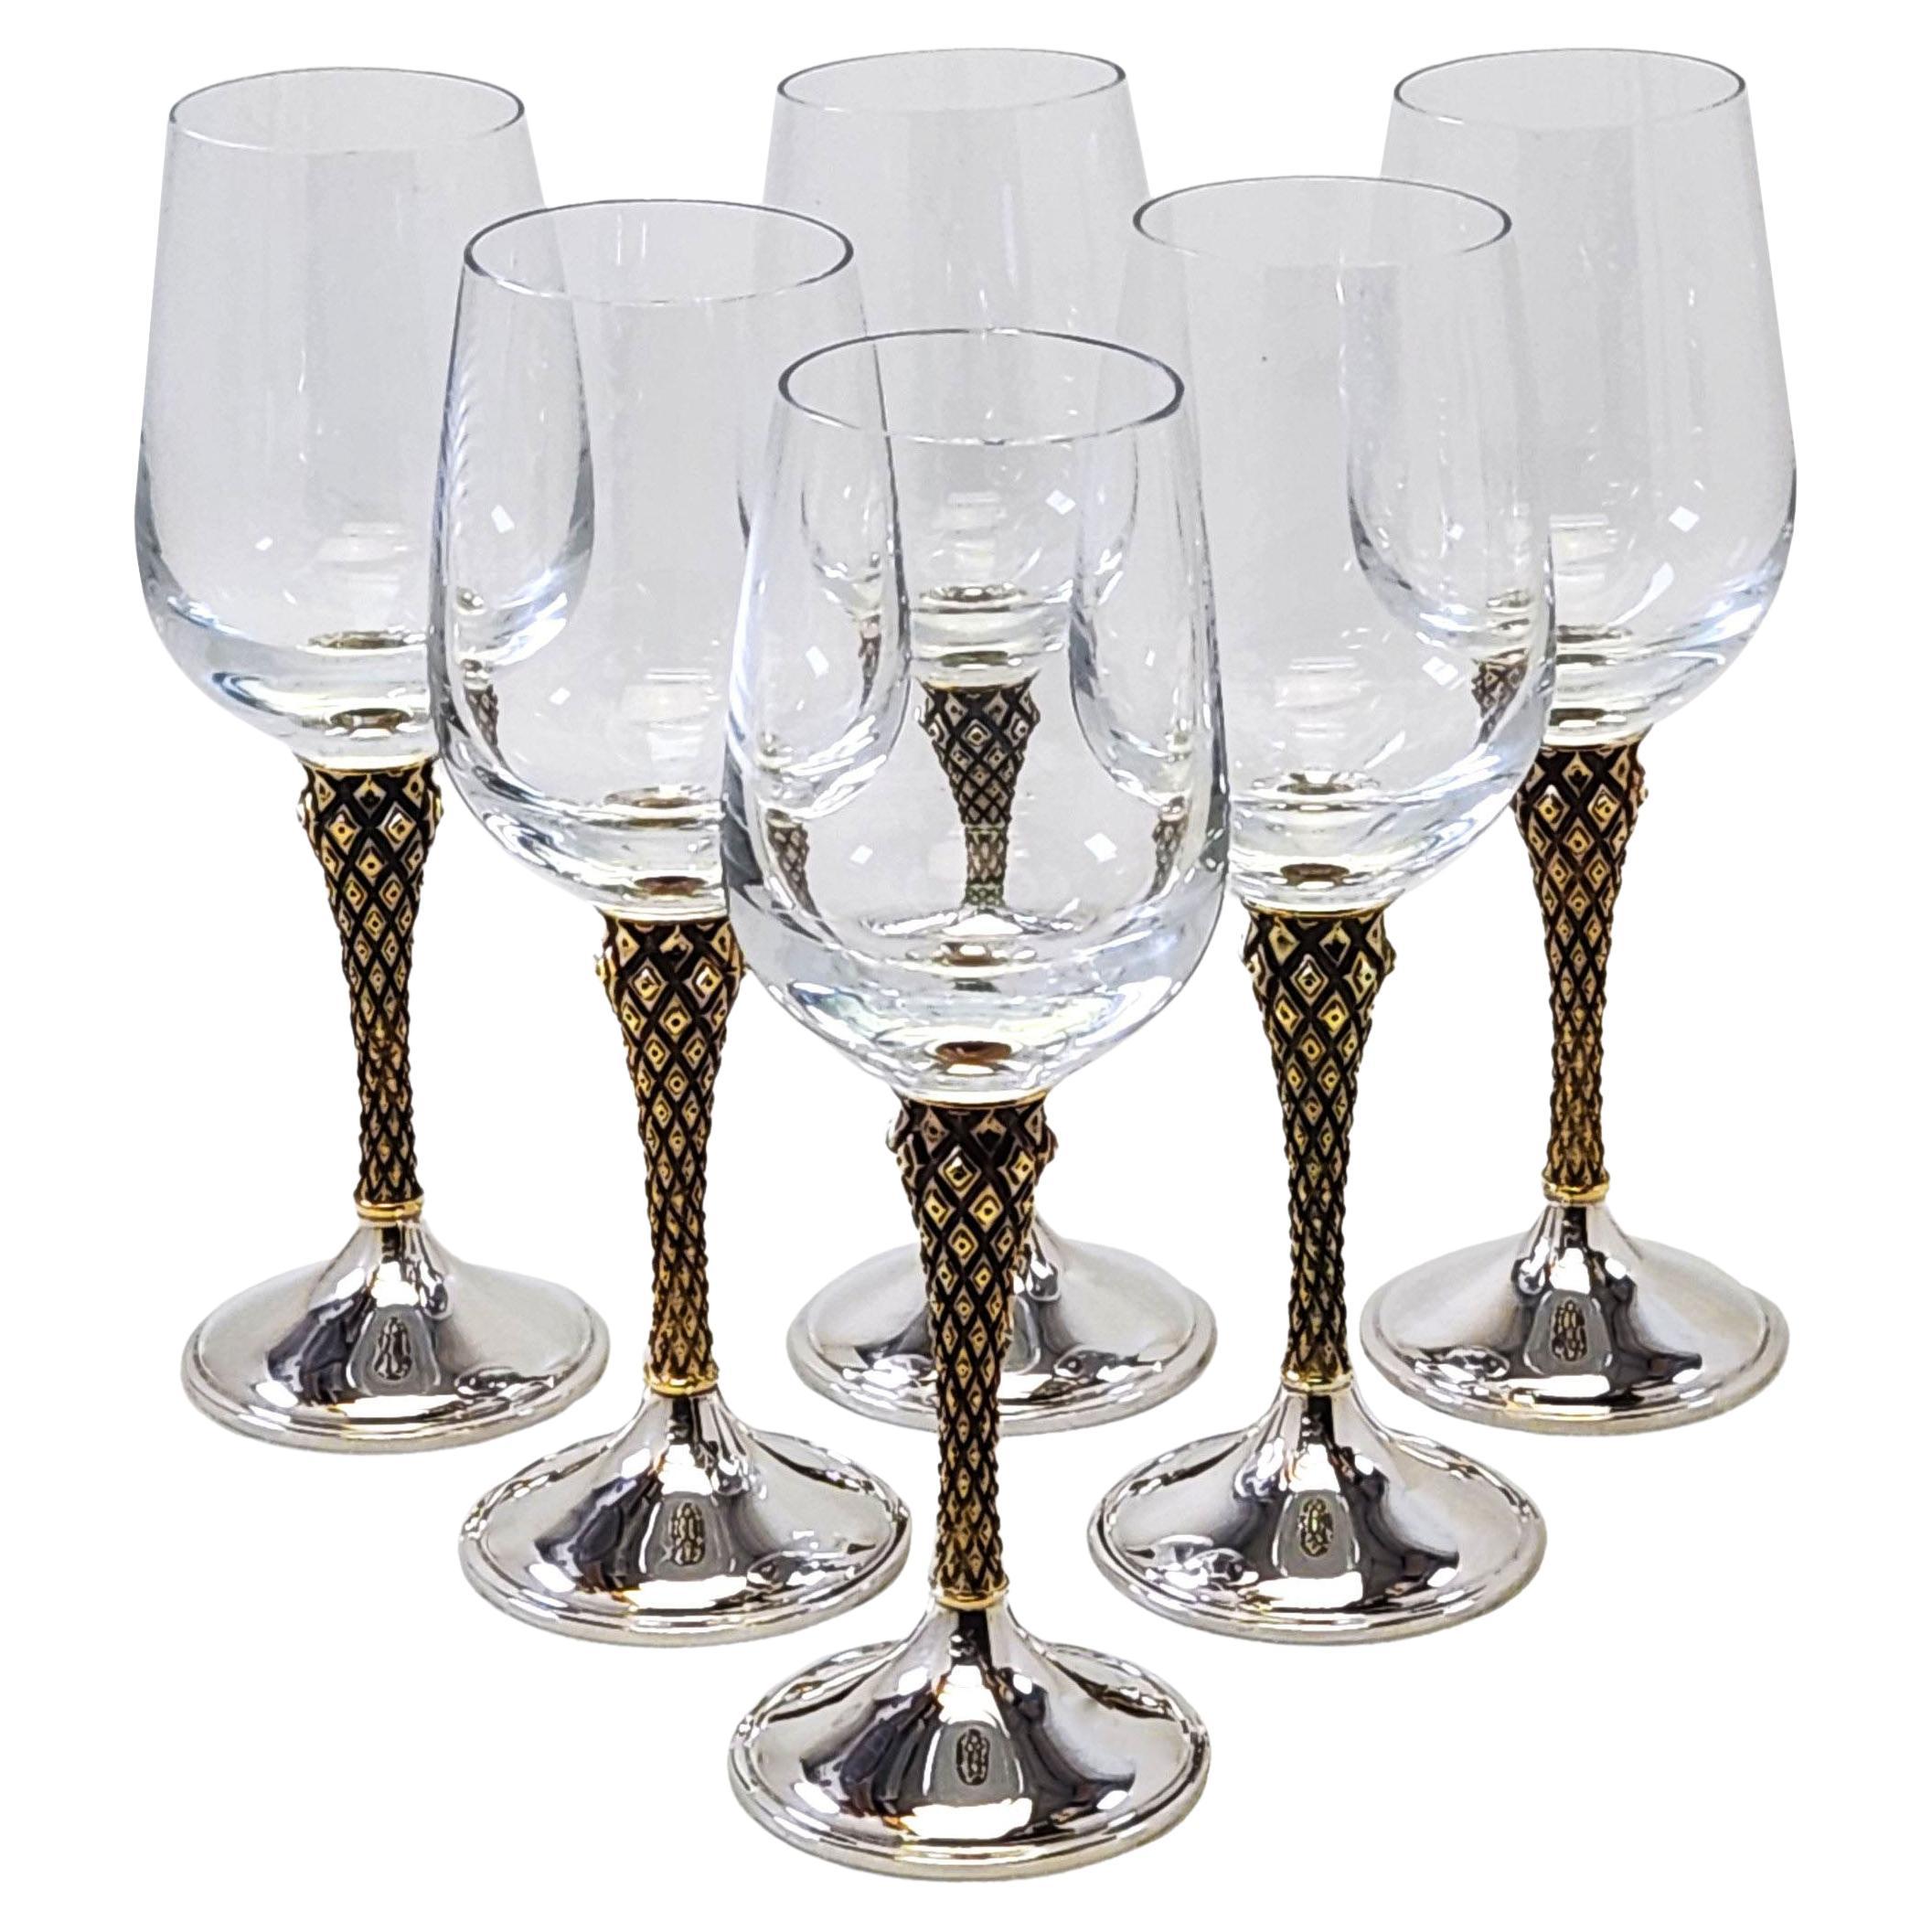 Set 6 Silver Gilt & Glass Wine Glasses Anthony Elson for Asprey  1976 / 77 Boxed